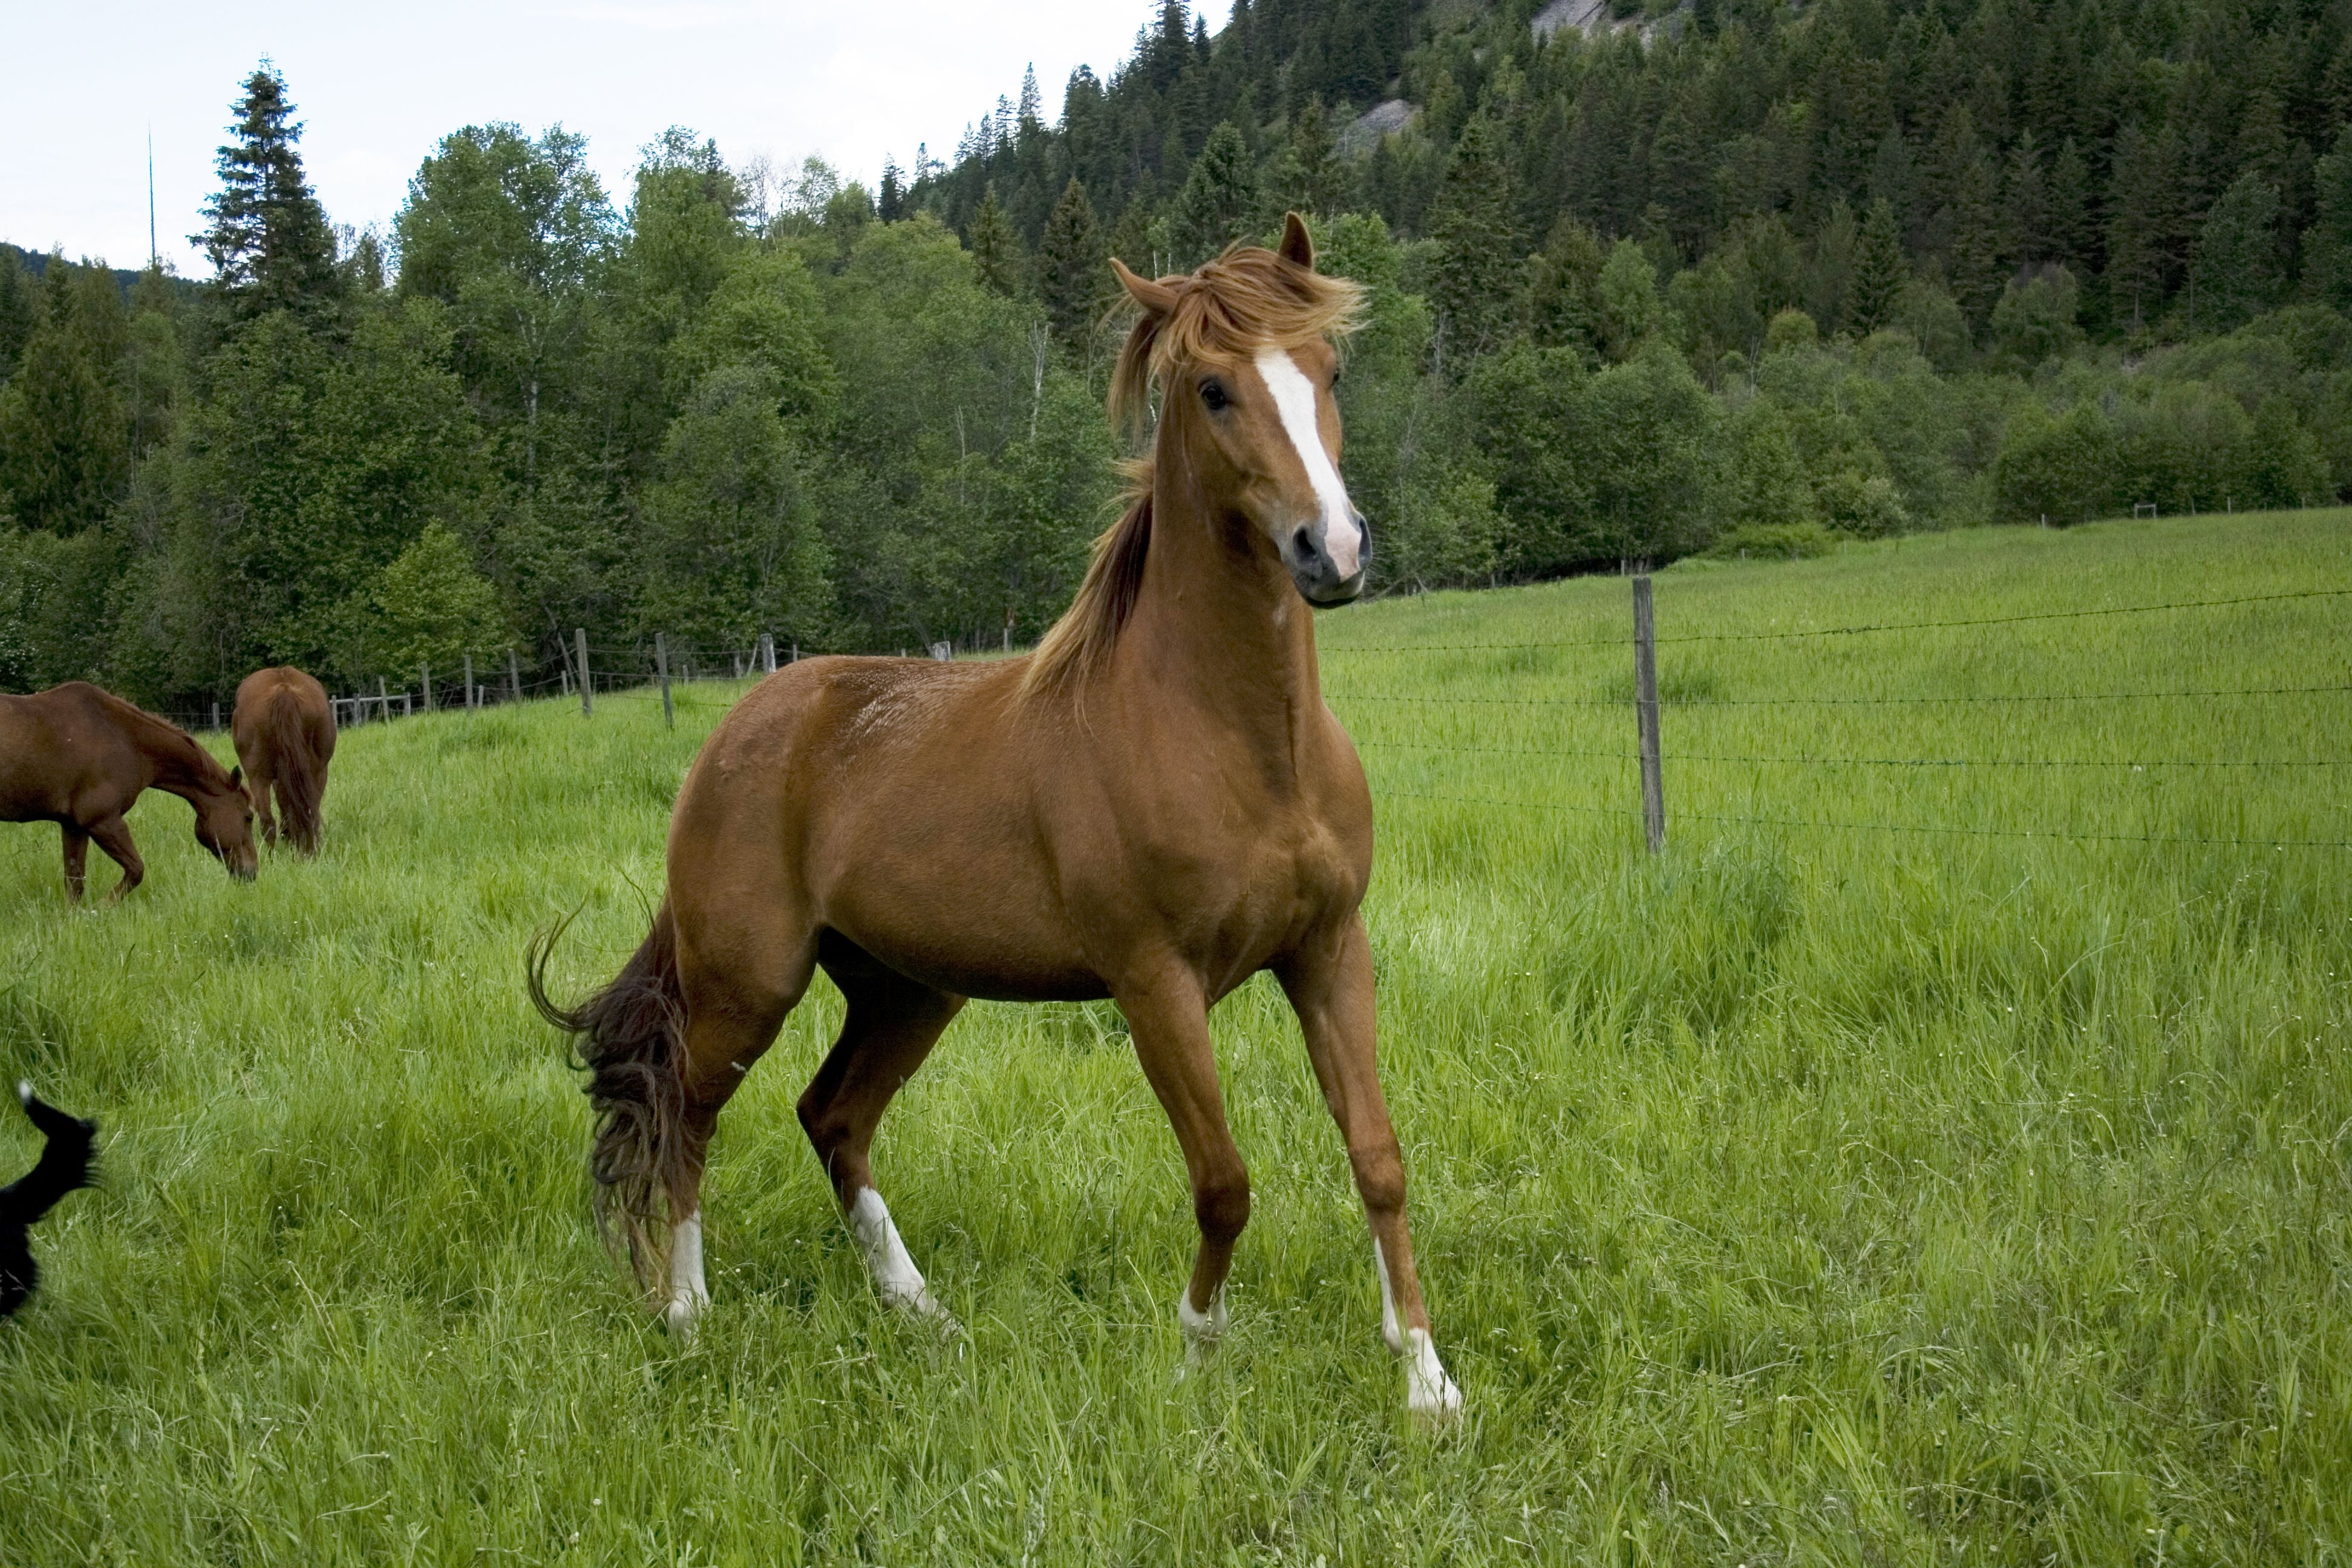 brown horse, field, grass, trees, animal, nature, stallion, outdoors